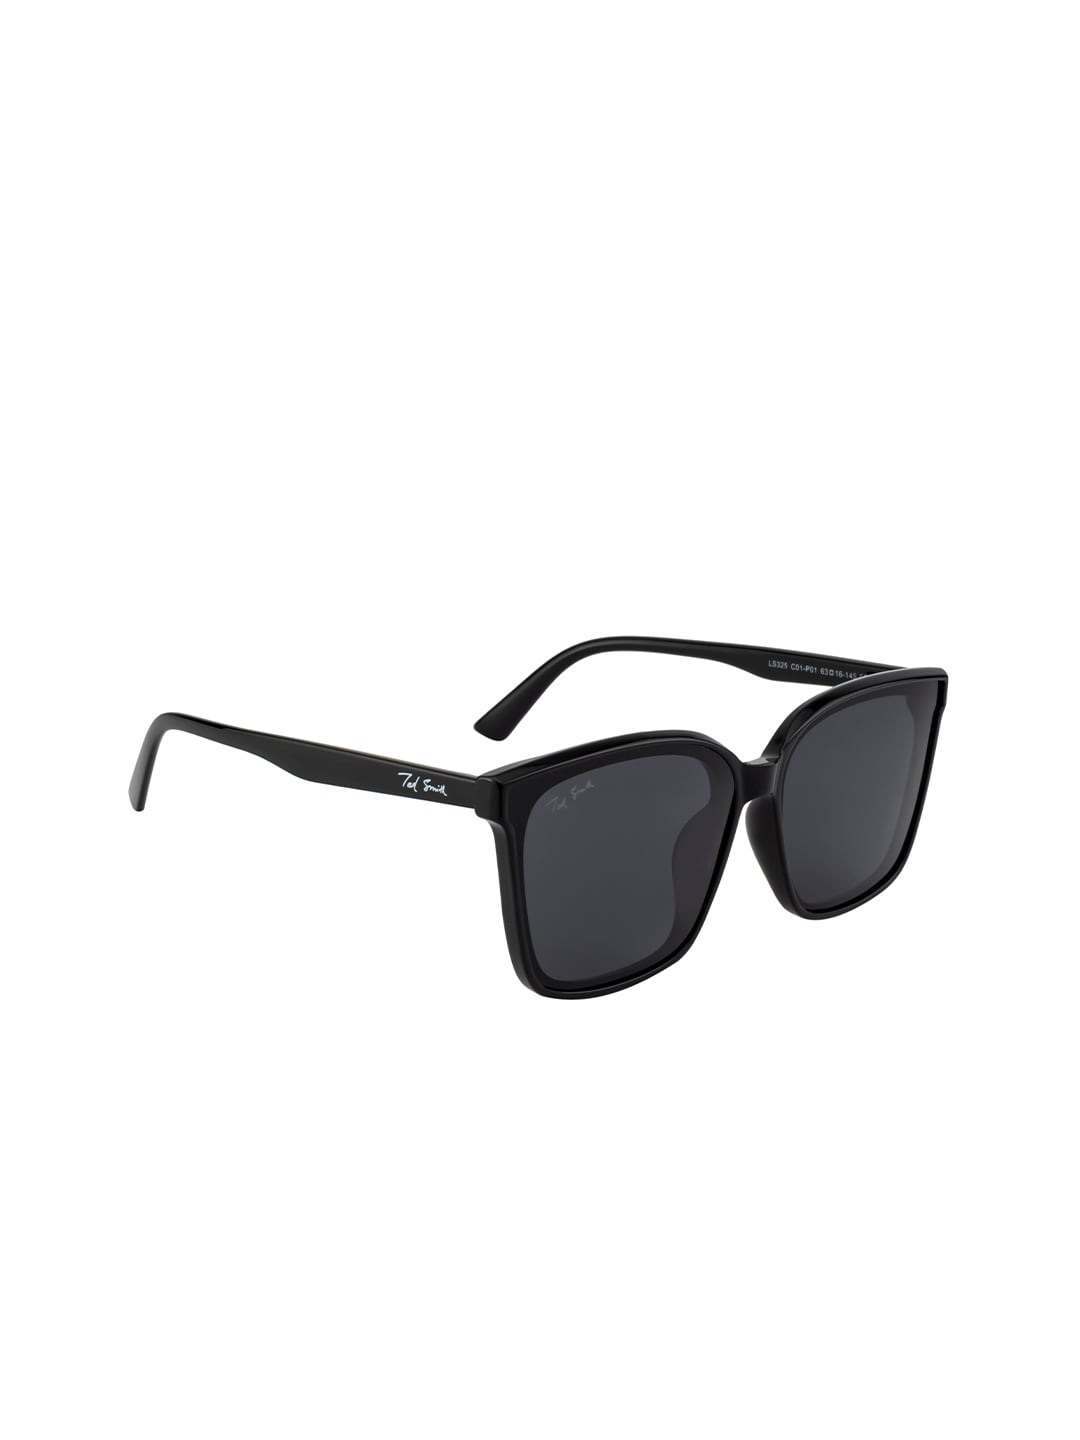 Ted Smith Unisex Black Lens & Black Square Sunglasses with Polarised and UV Protected Lens Price in India